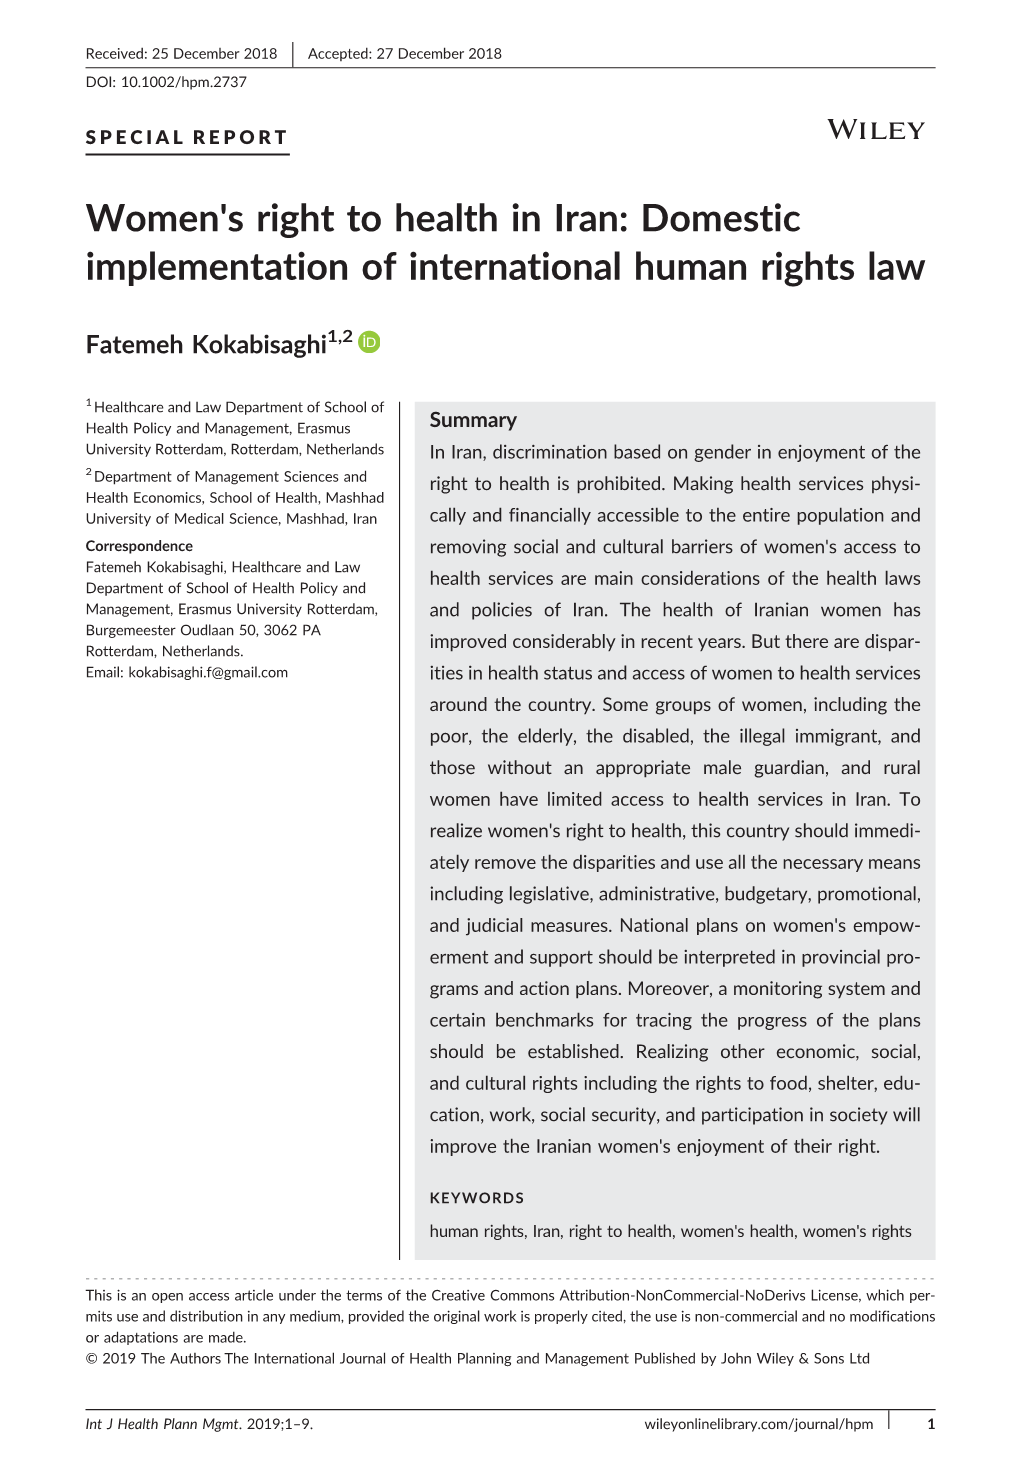 Women's Right to Health in Iran: Domestic Implementation of International Human Rights Law